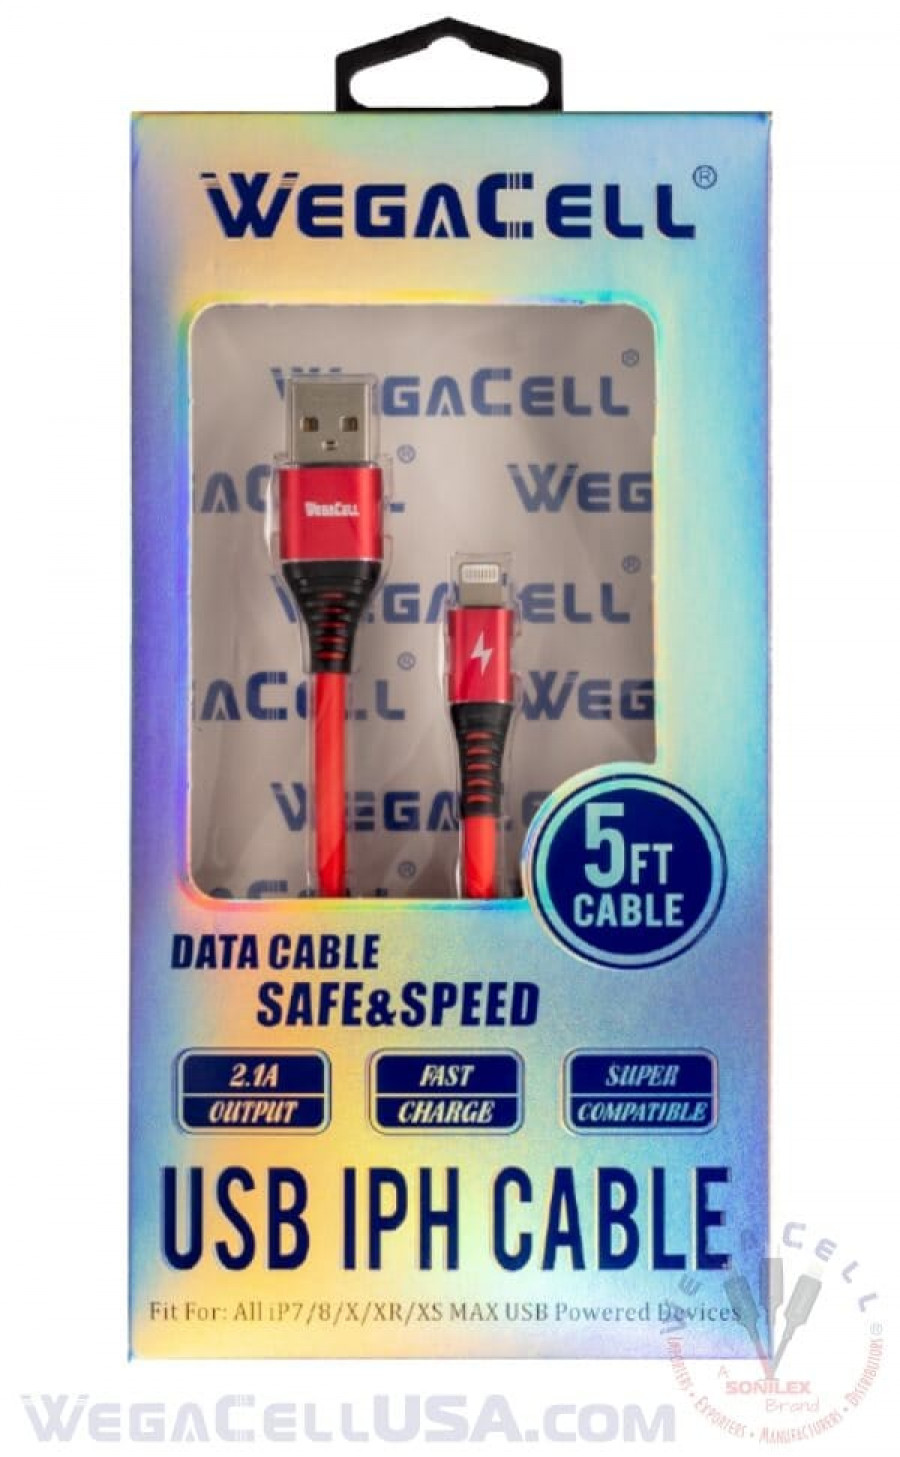 apple compatible fast charging 5 ft lightning tpe data cable - wholesale pkg. wegacell: wl-5cbl12-iph data cable 24